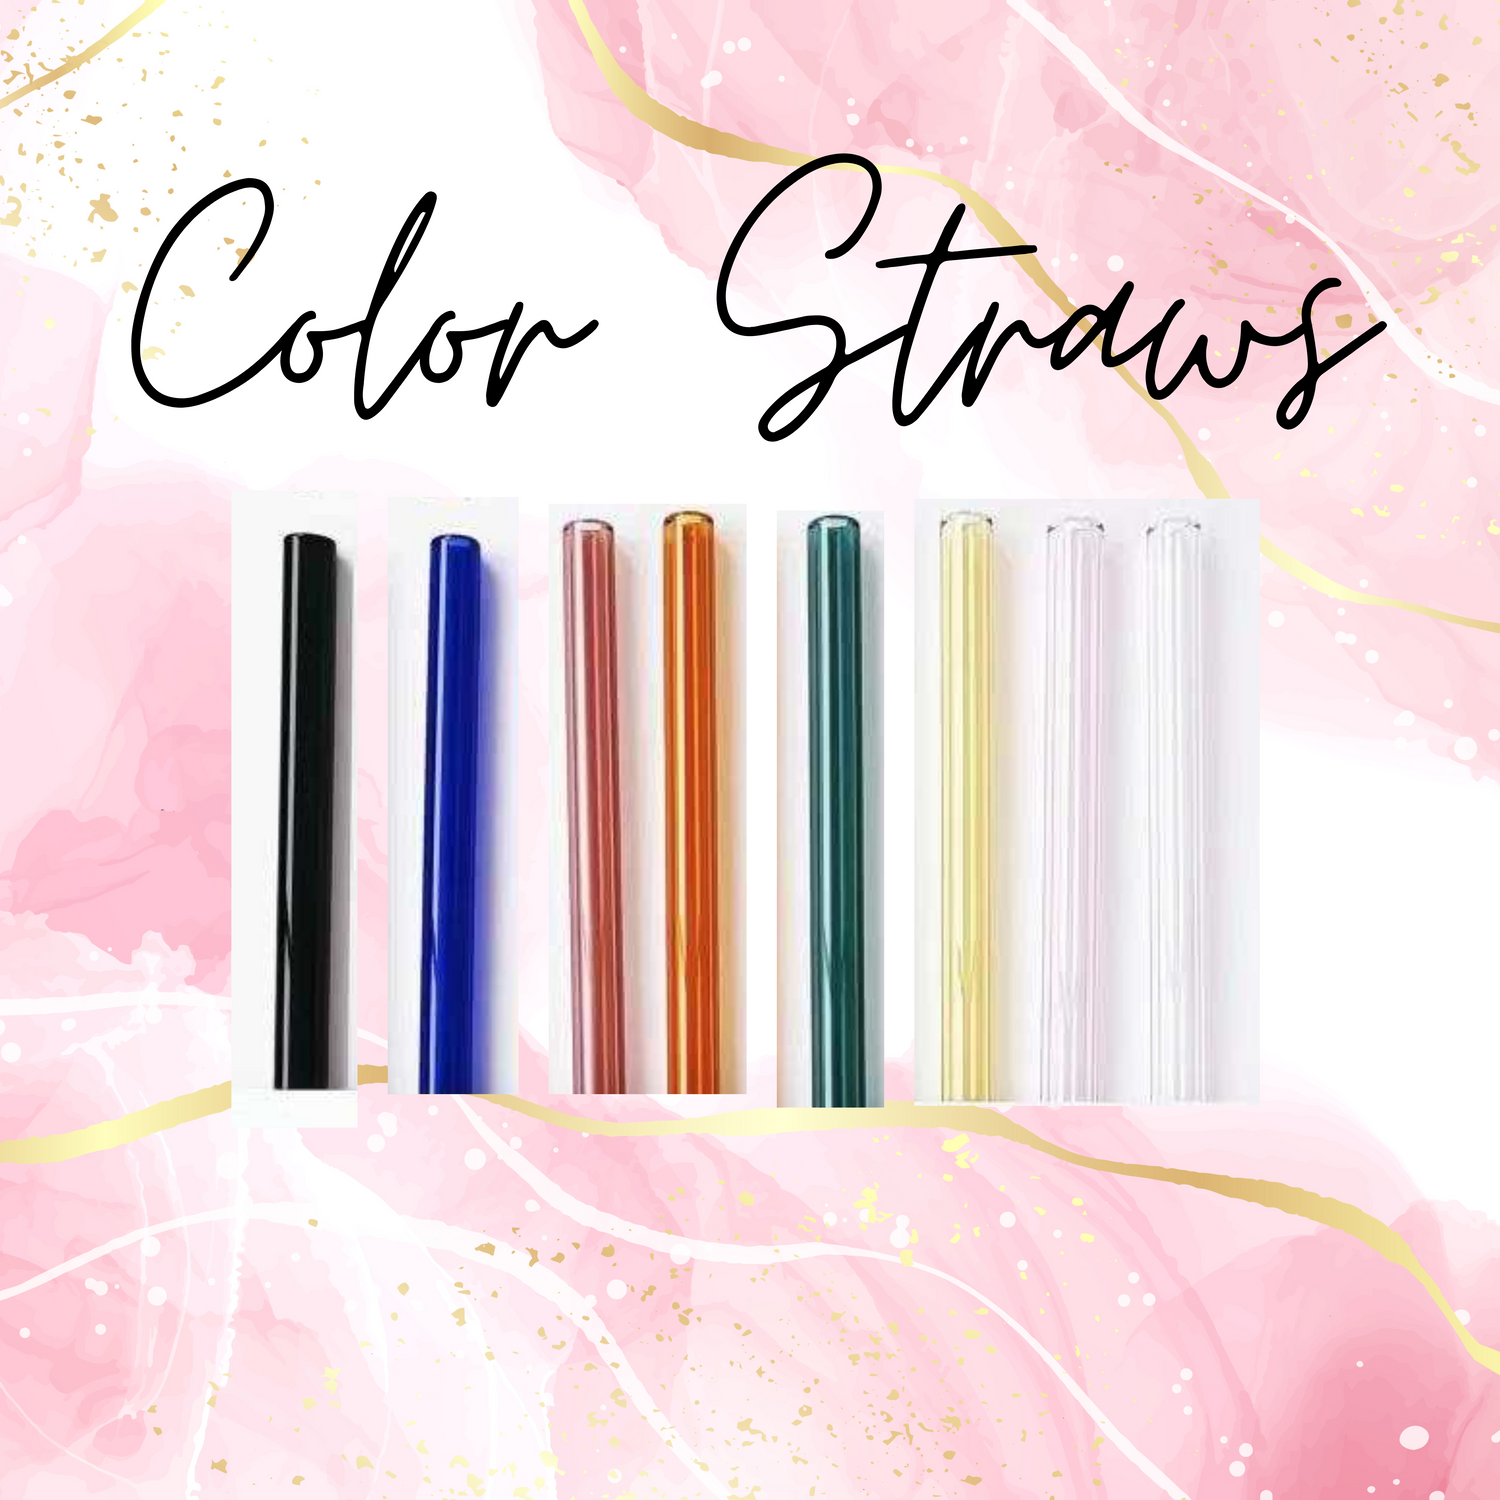 Wholesale Clear GLASS STRAWS - Wholesale Straws | Reusable Straws | Party  Favors | Clear Straws | Wedding Favors | Wholesale Glass Straws